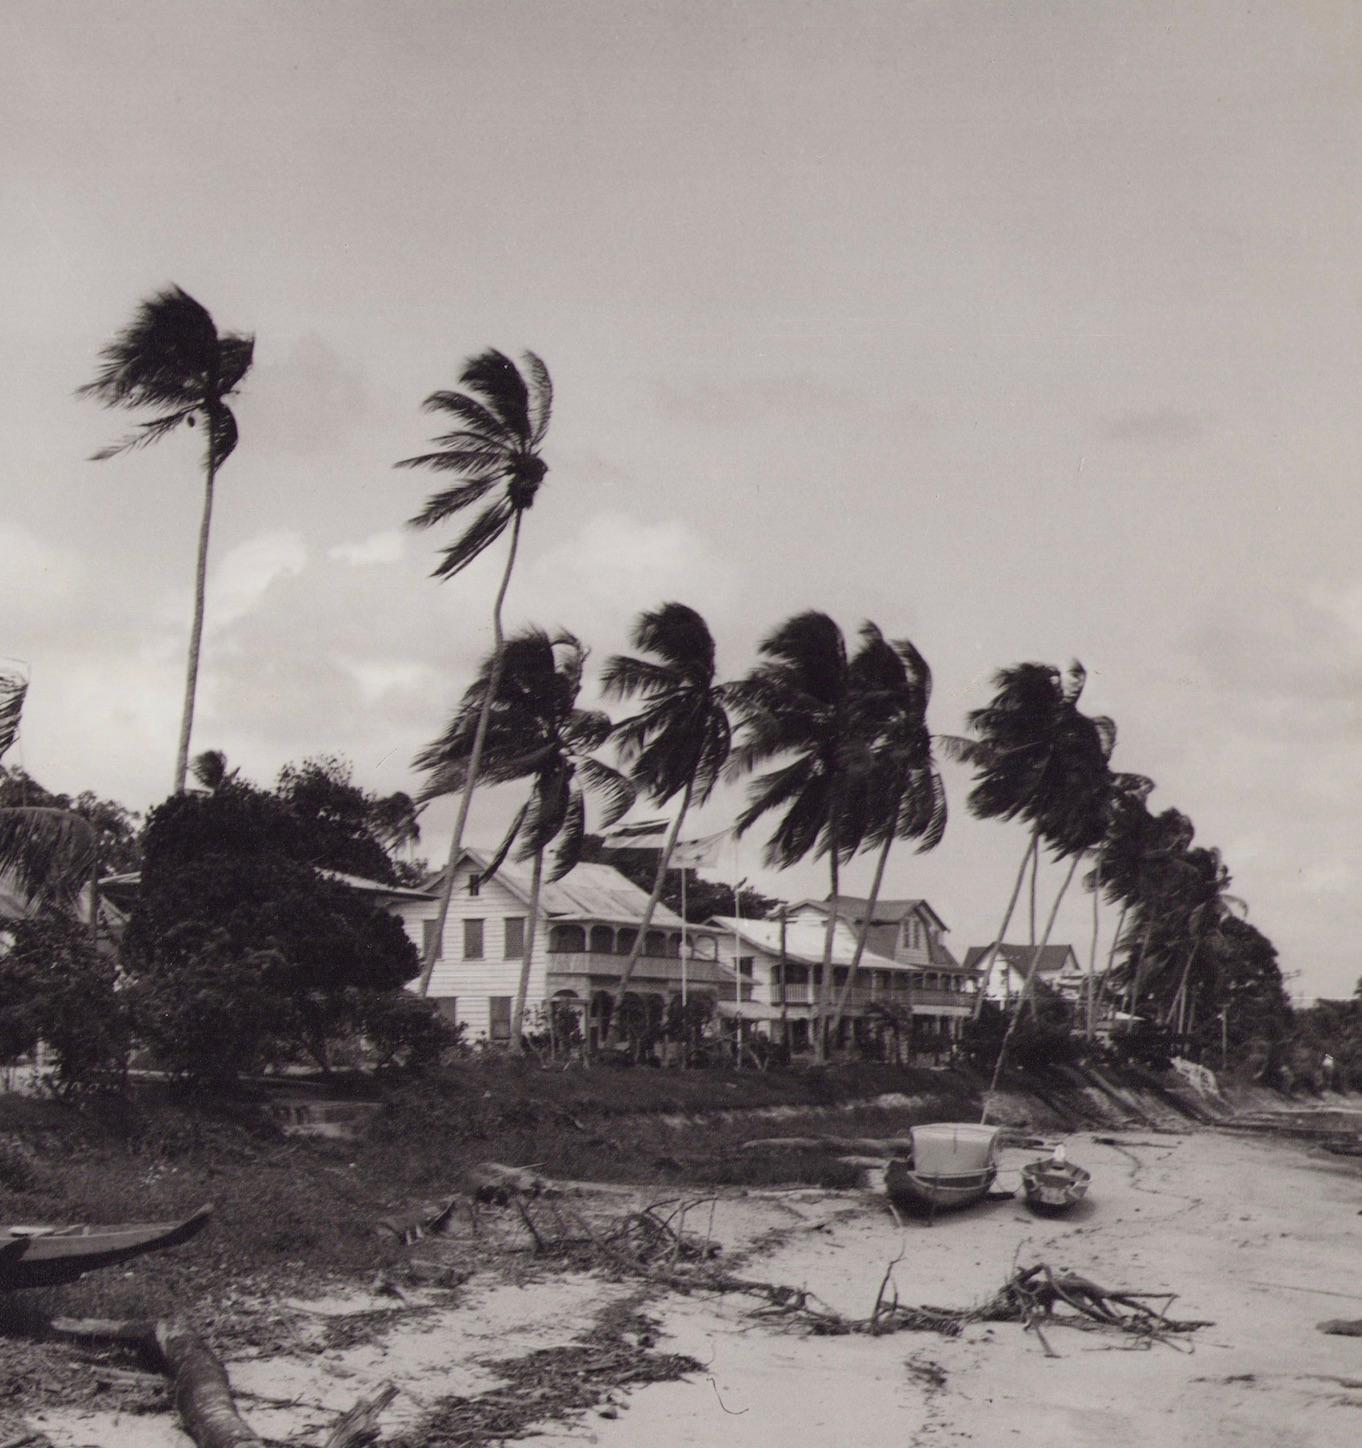 Suriname, River, Palmtrees, Black and White Photography, 1960s, 23, 5 x 29, 1 cm For Sale 1